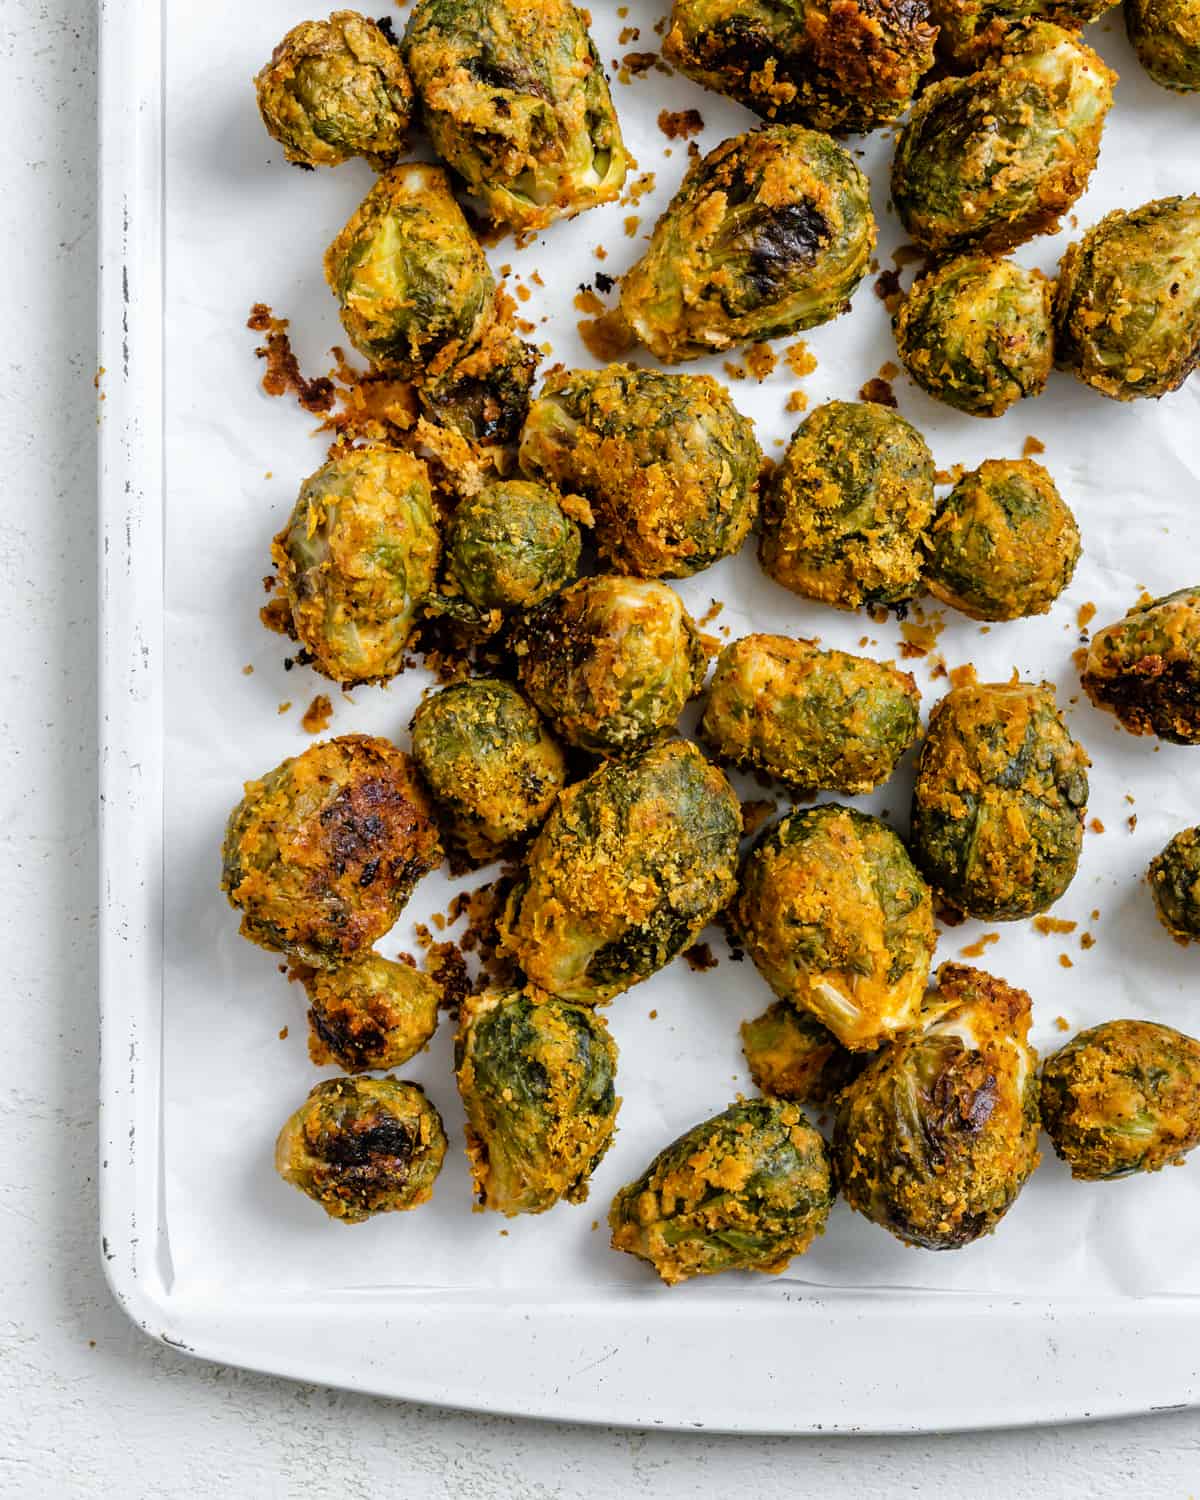 completed Easy Vegan Brussels Sprouts scattered on a white surface